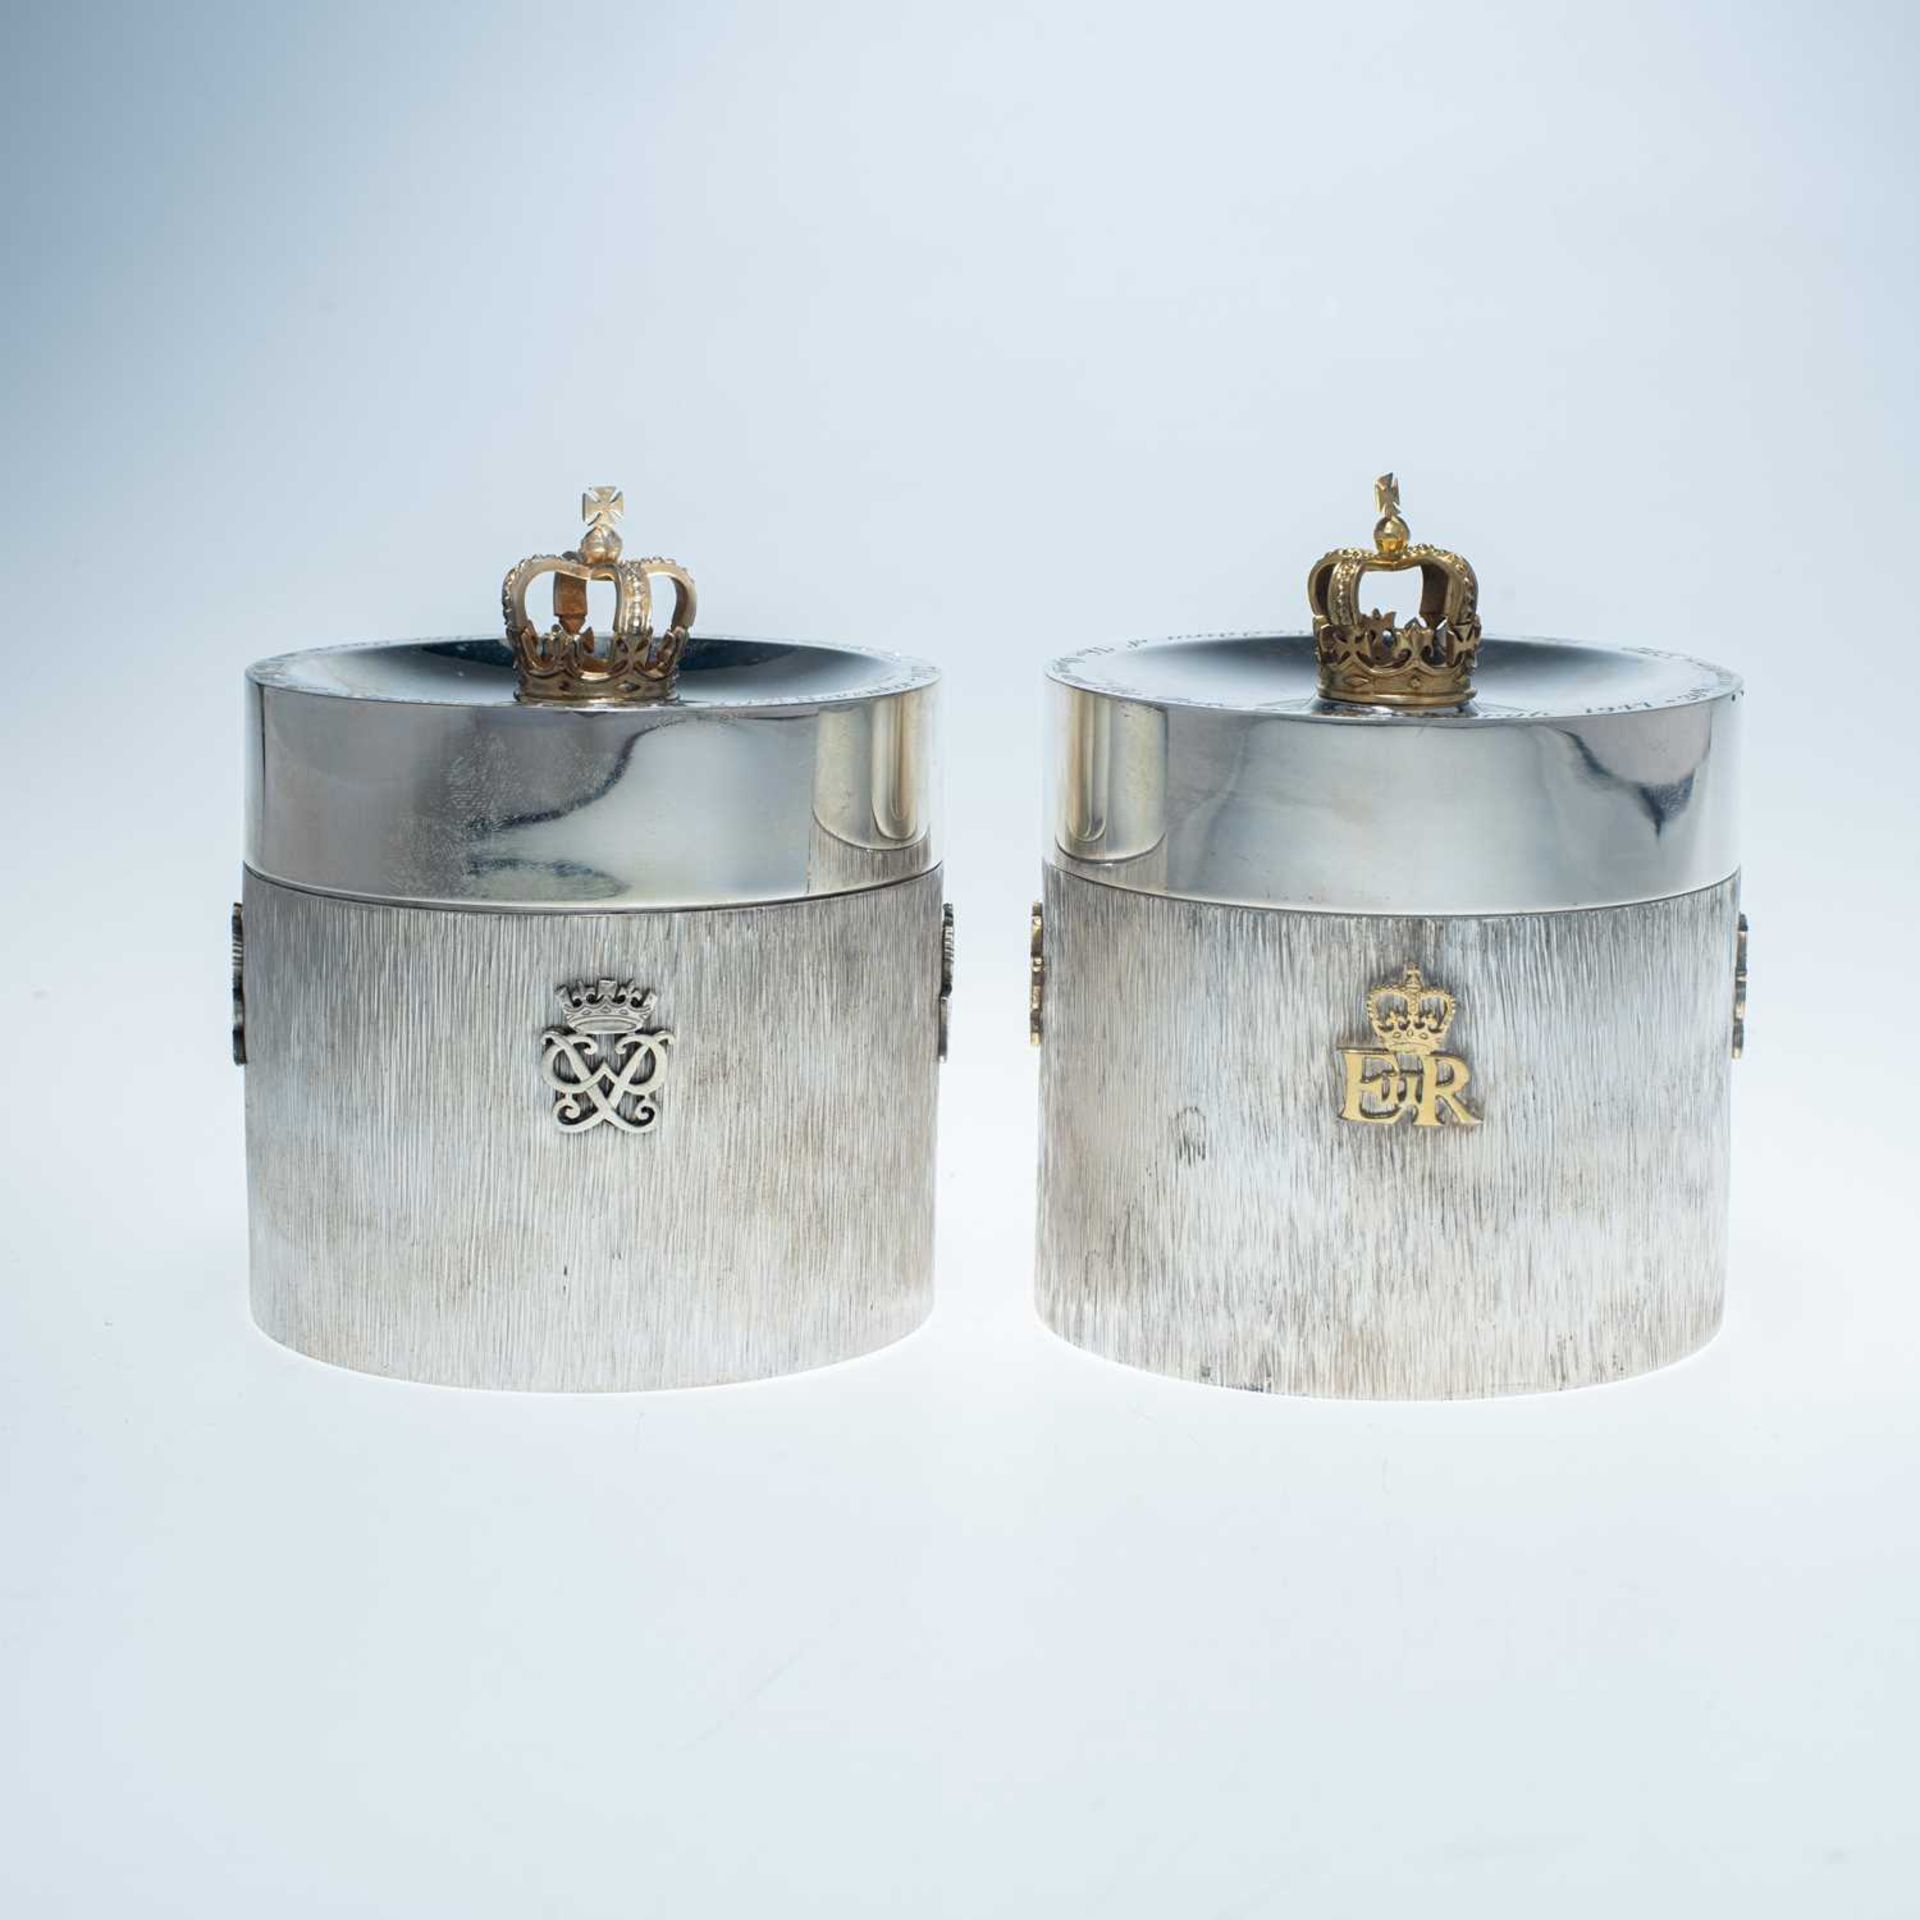 A NEAR PAIR OF ELIZABETH II LIMITED EDITION ROYAL COMMEMORATIVE PARCEL-GILT SILVER CANISTERS